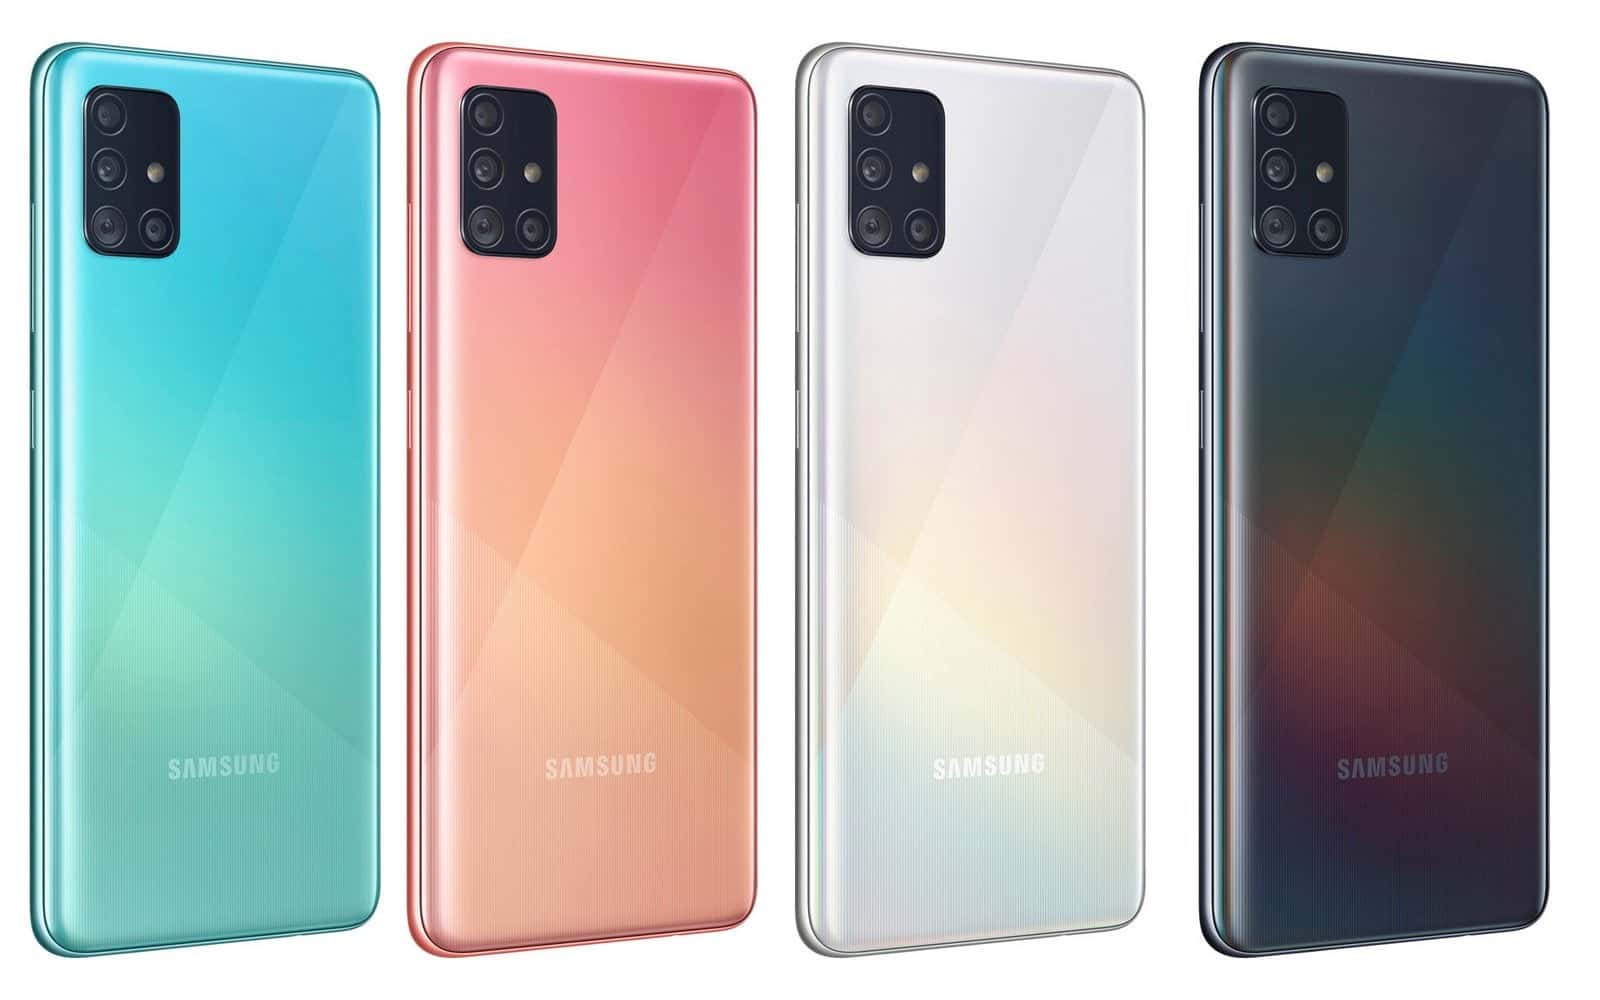 Galaxy A51 launched in India with 6.5-inch Infinity-O AMOLED display